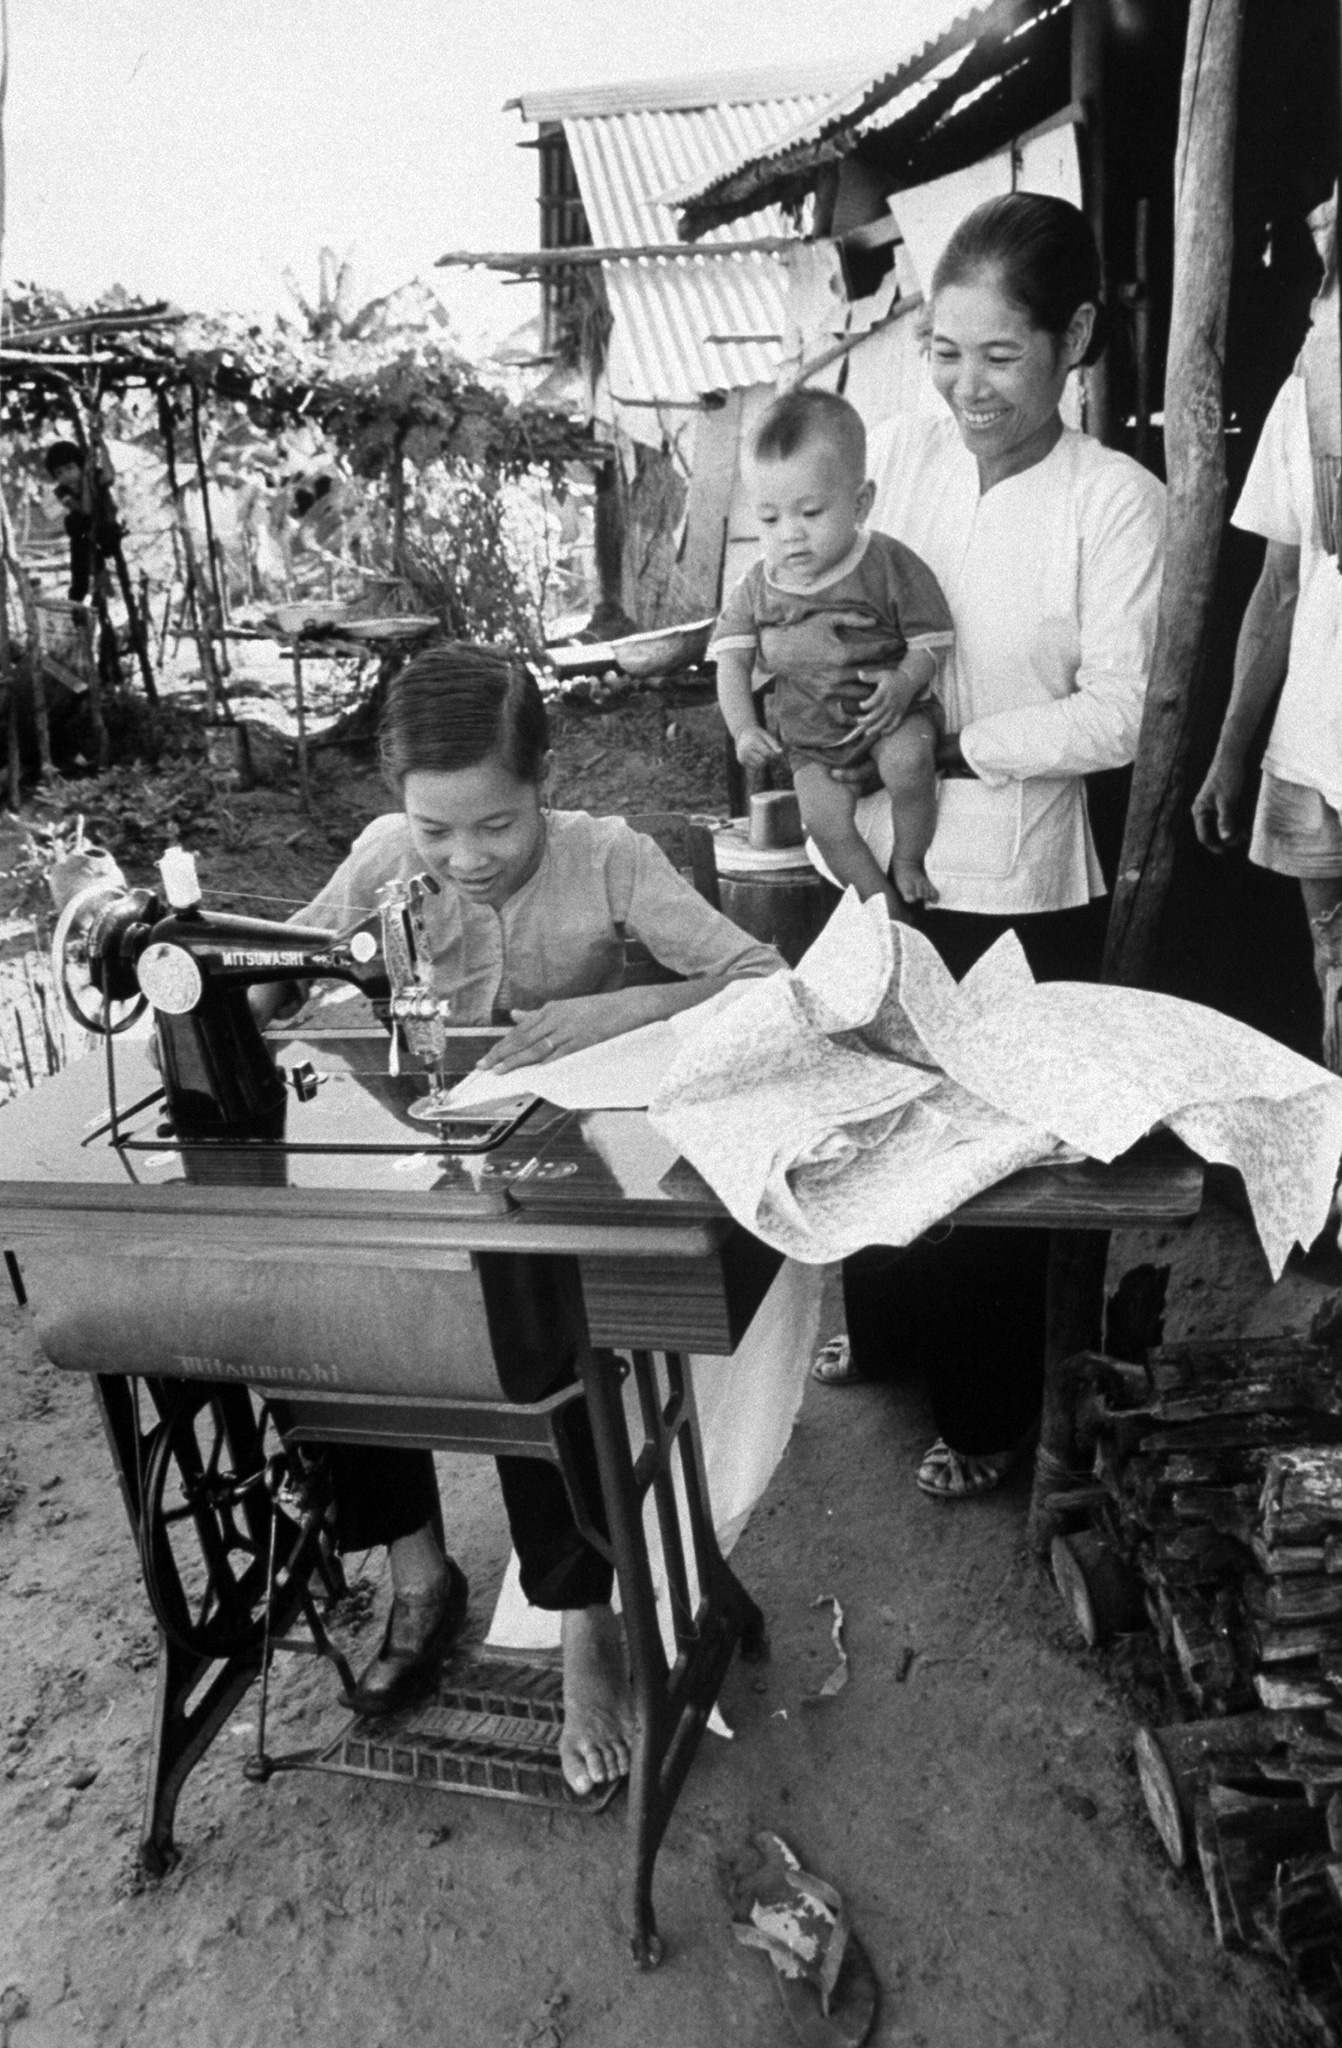 Nguyen Thi Tron at the sewing machine given to her by LIFE photographer Larry Burrows.